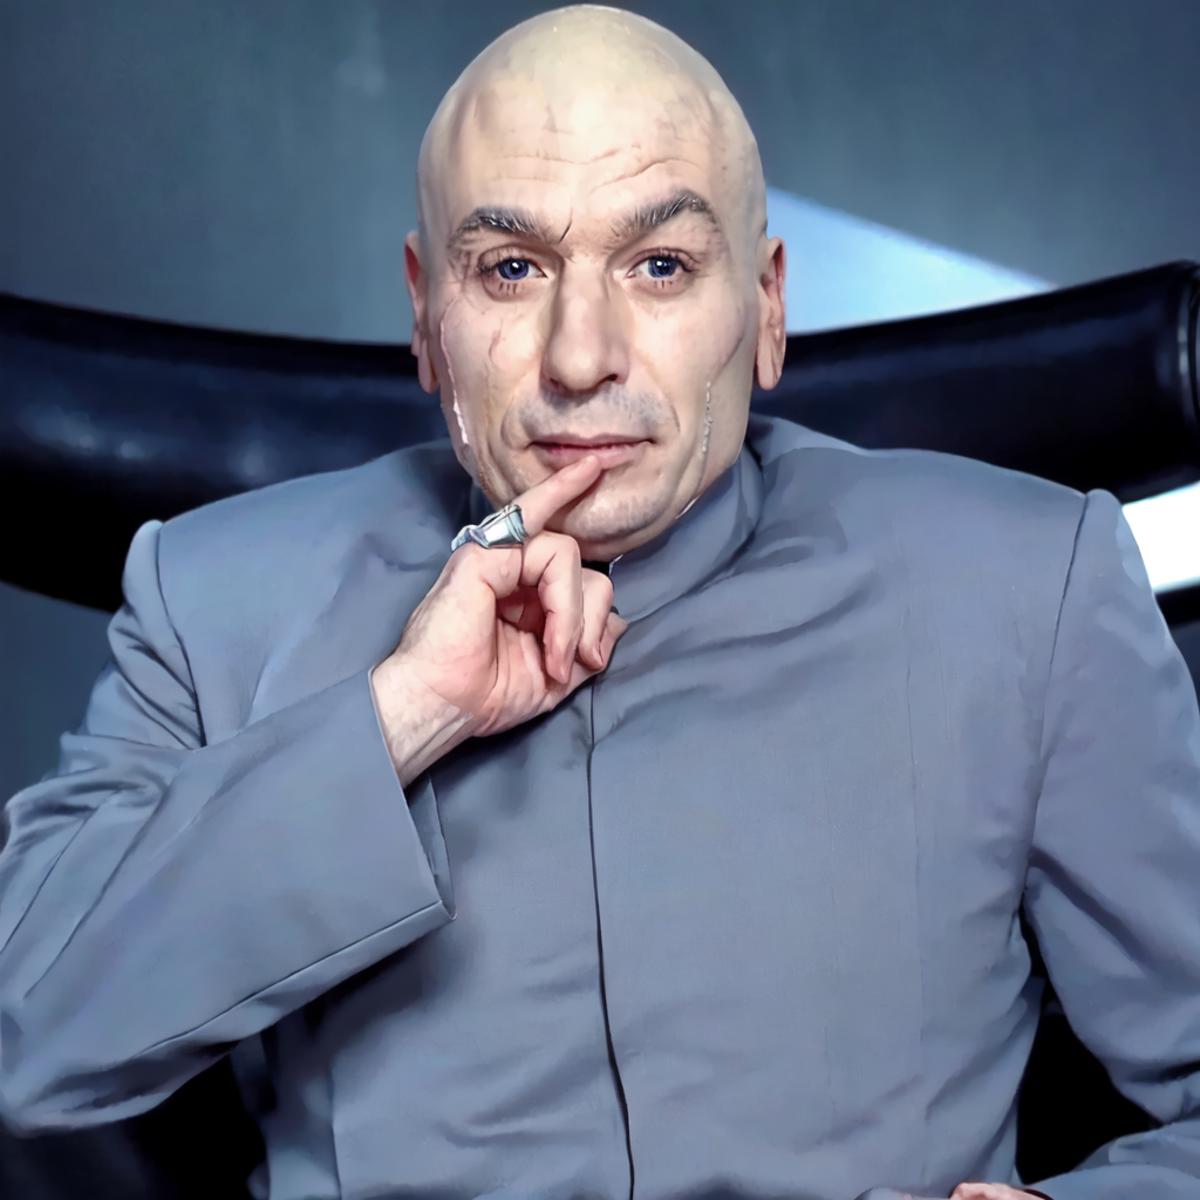 Dr. Evil from Austin Powers (Mike Myers) image by Bloodysunkist